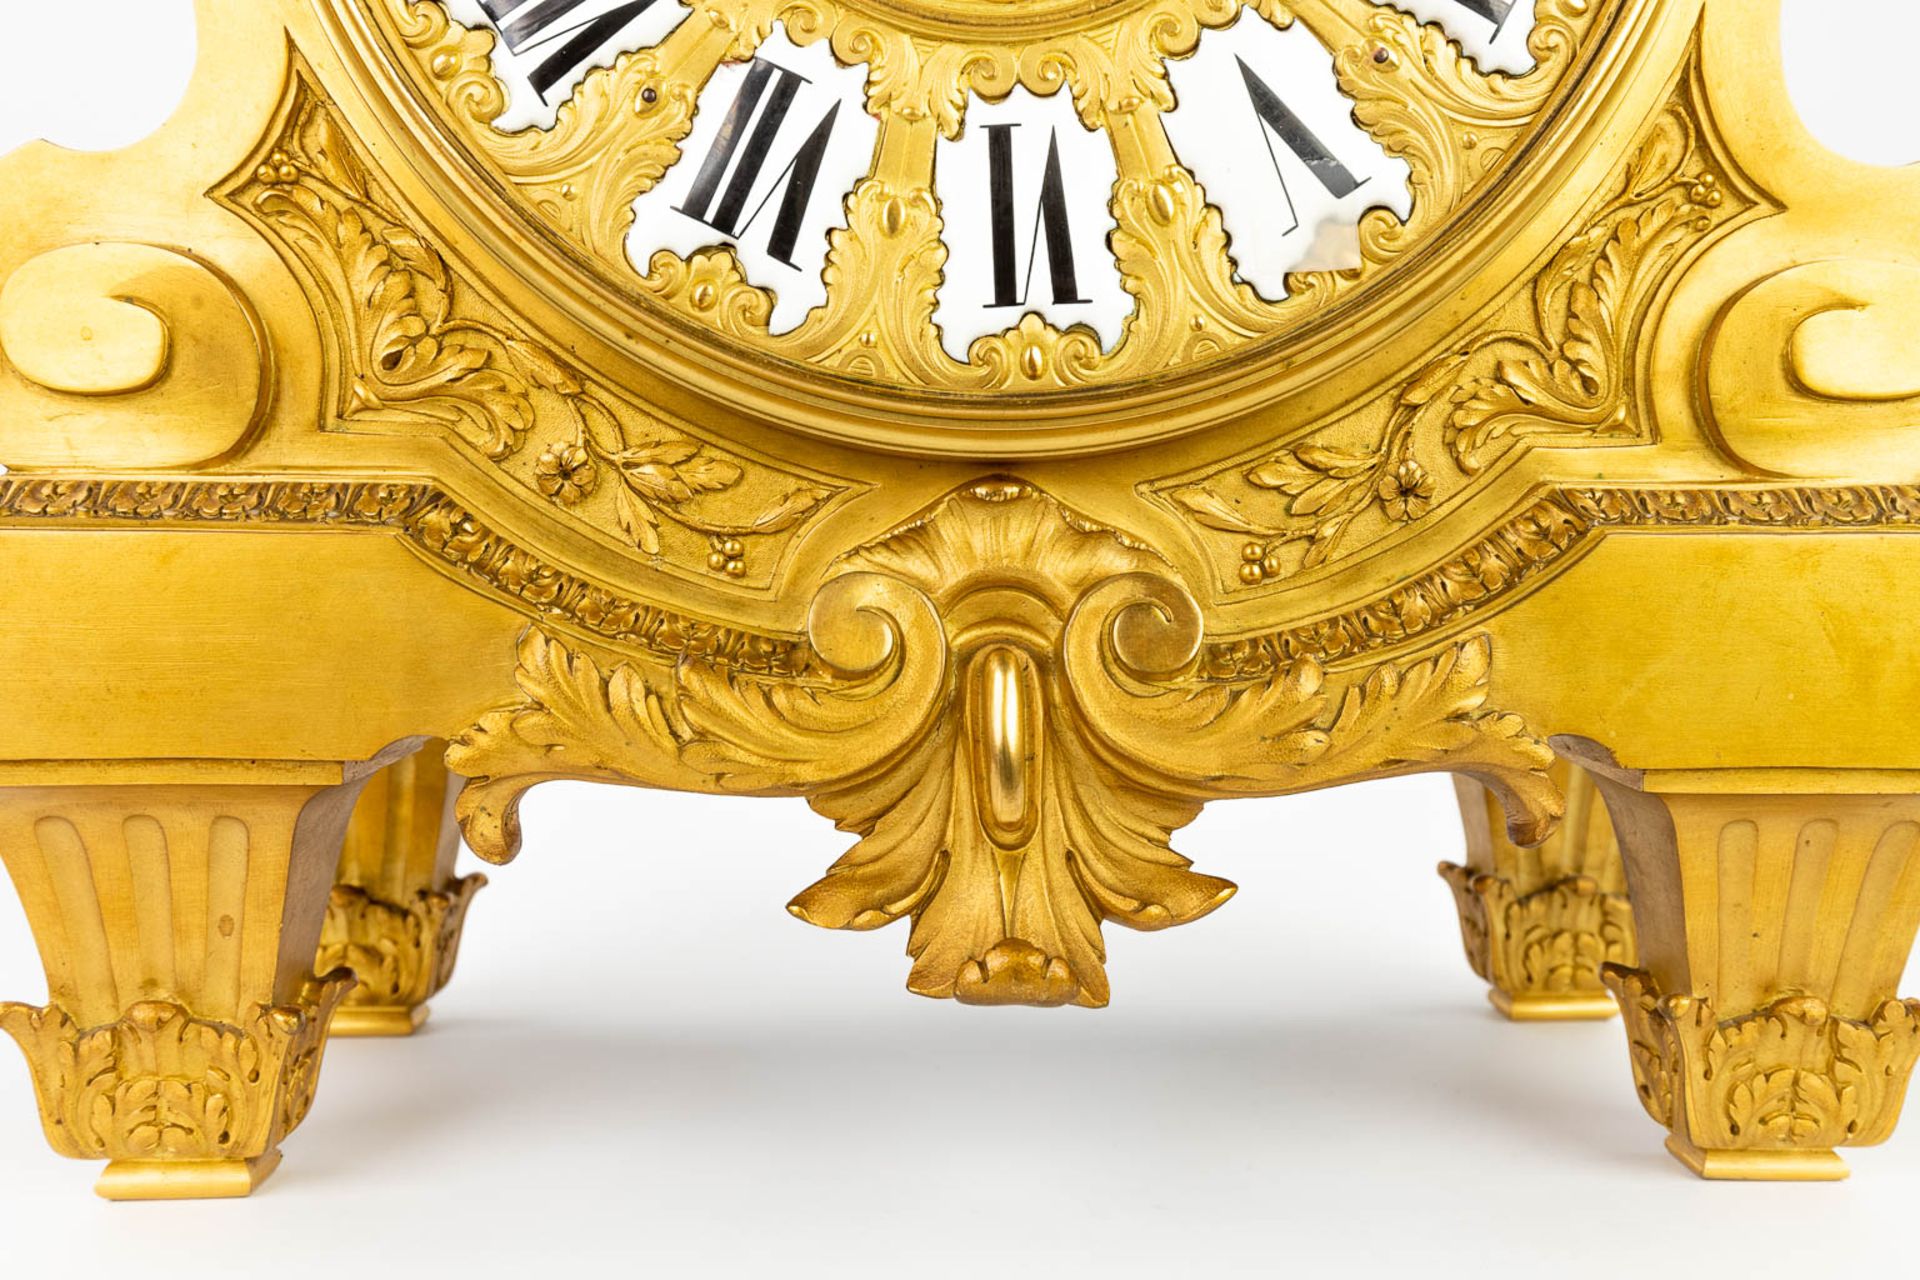 A large mantle clock 'Father Time' made of gilt bronze in Louis XVI style. (18 x 40 x 74cm) - Image 13 of 14